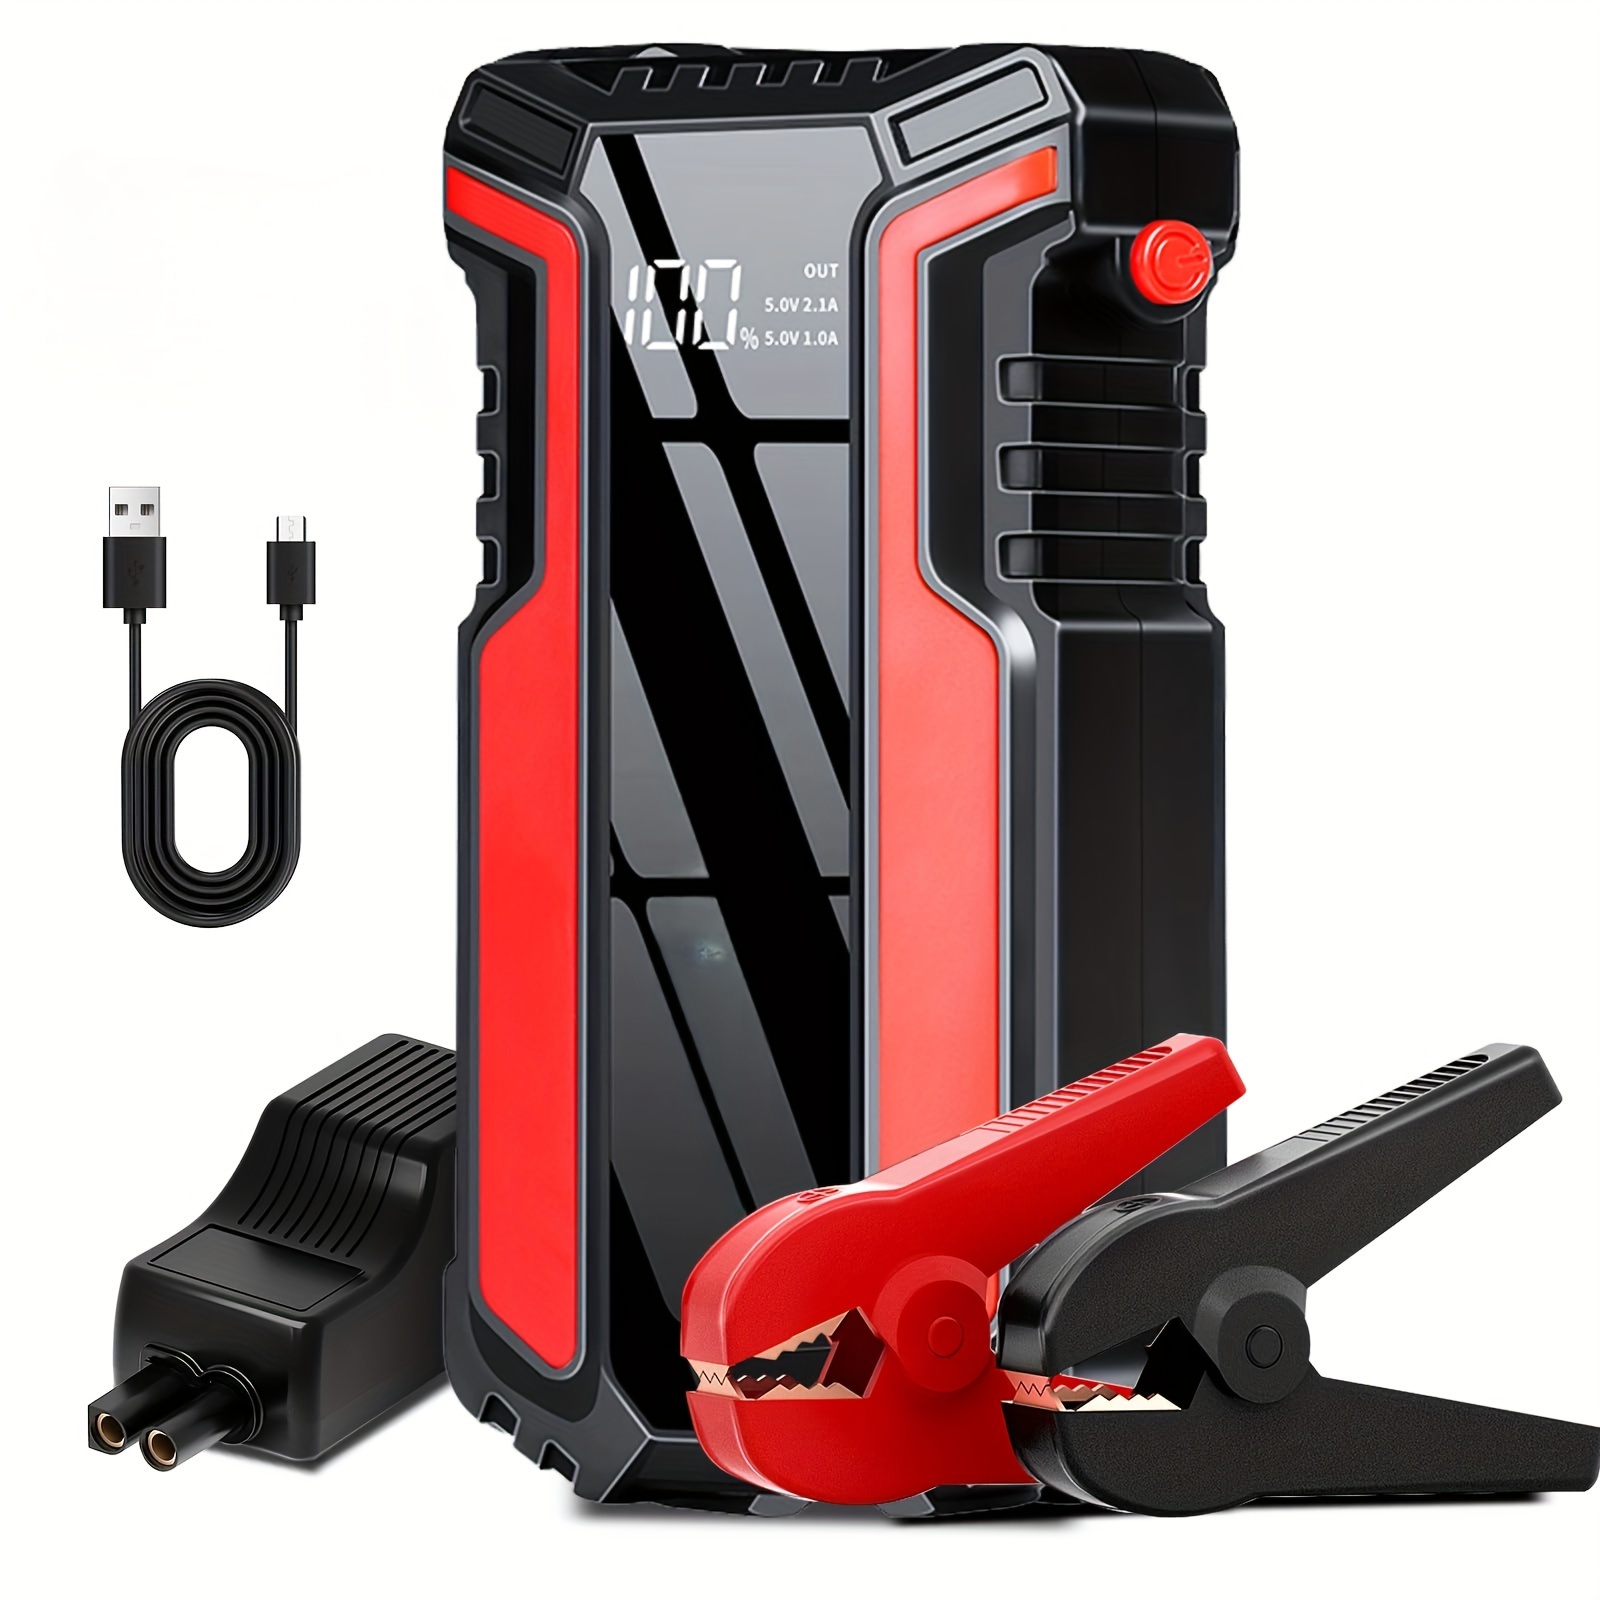 FlyLinkTech Car and Truck Portable Jump Starter, Powers up to 5 liter gas  engines or 3 liter diesels 